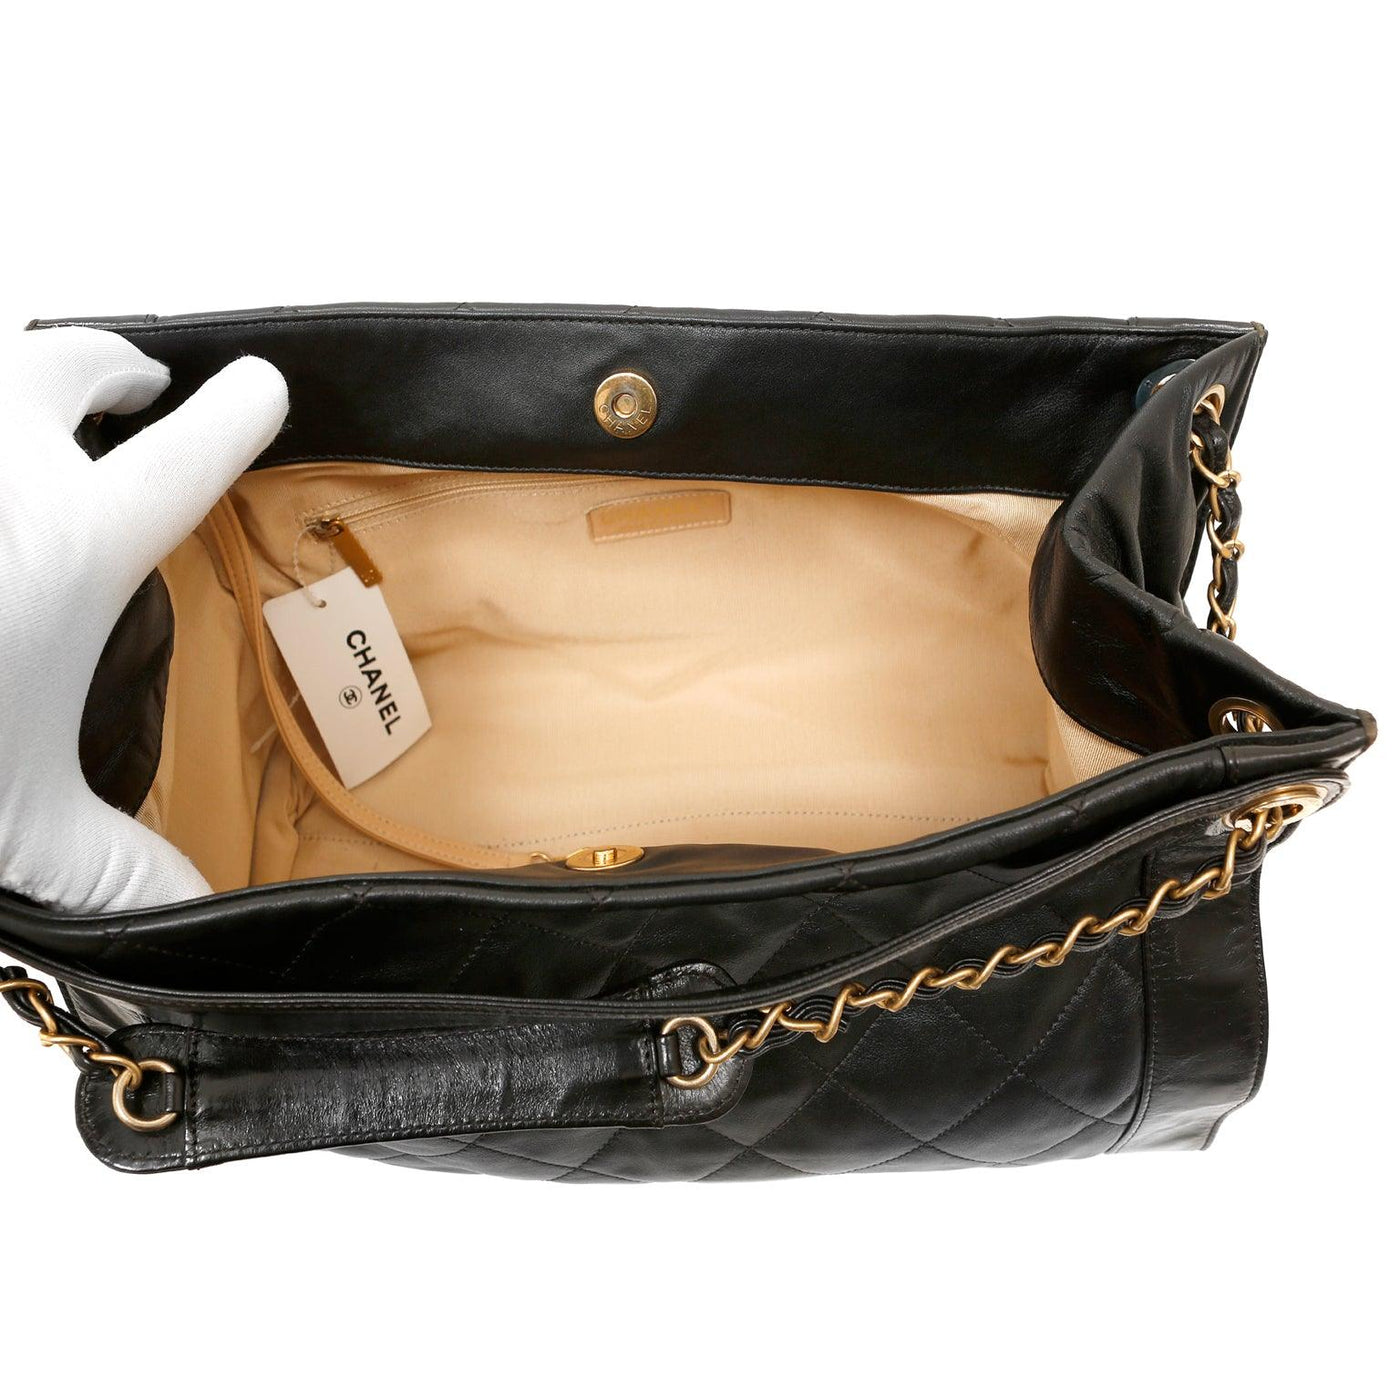 Chanel Black Calfskin Shopper Tote with Gold Hardware - Only Authentics